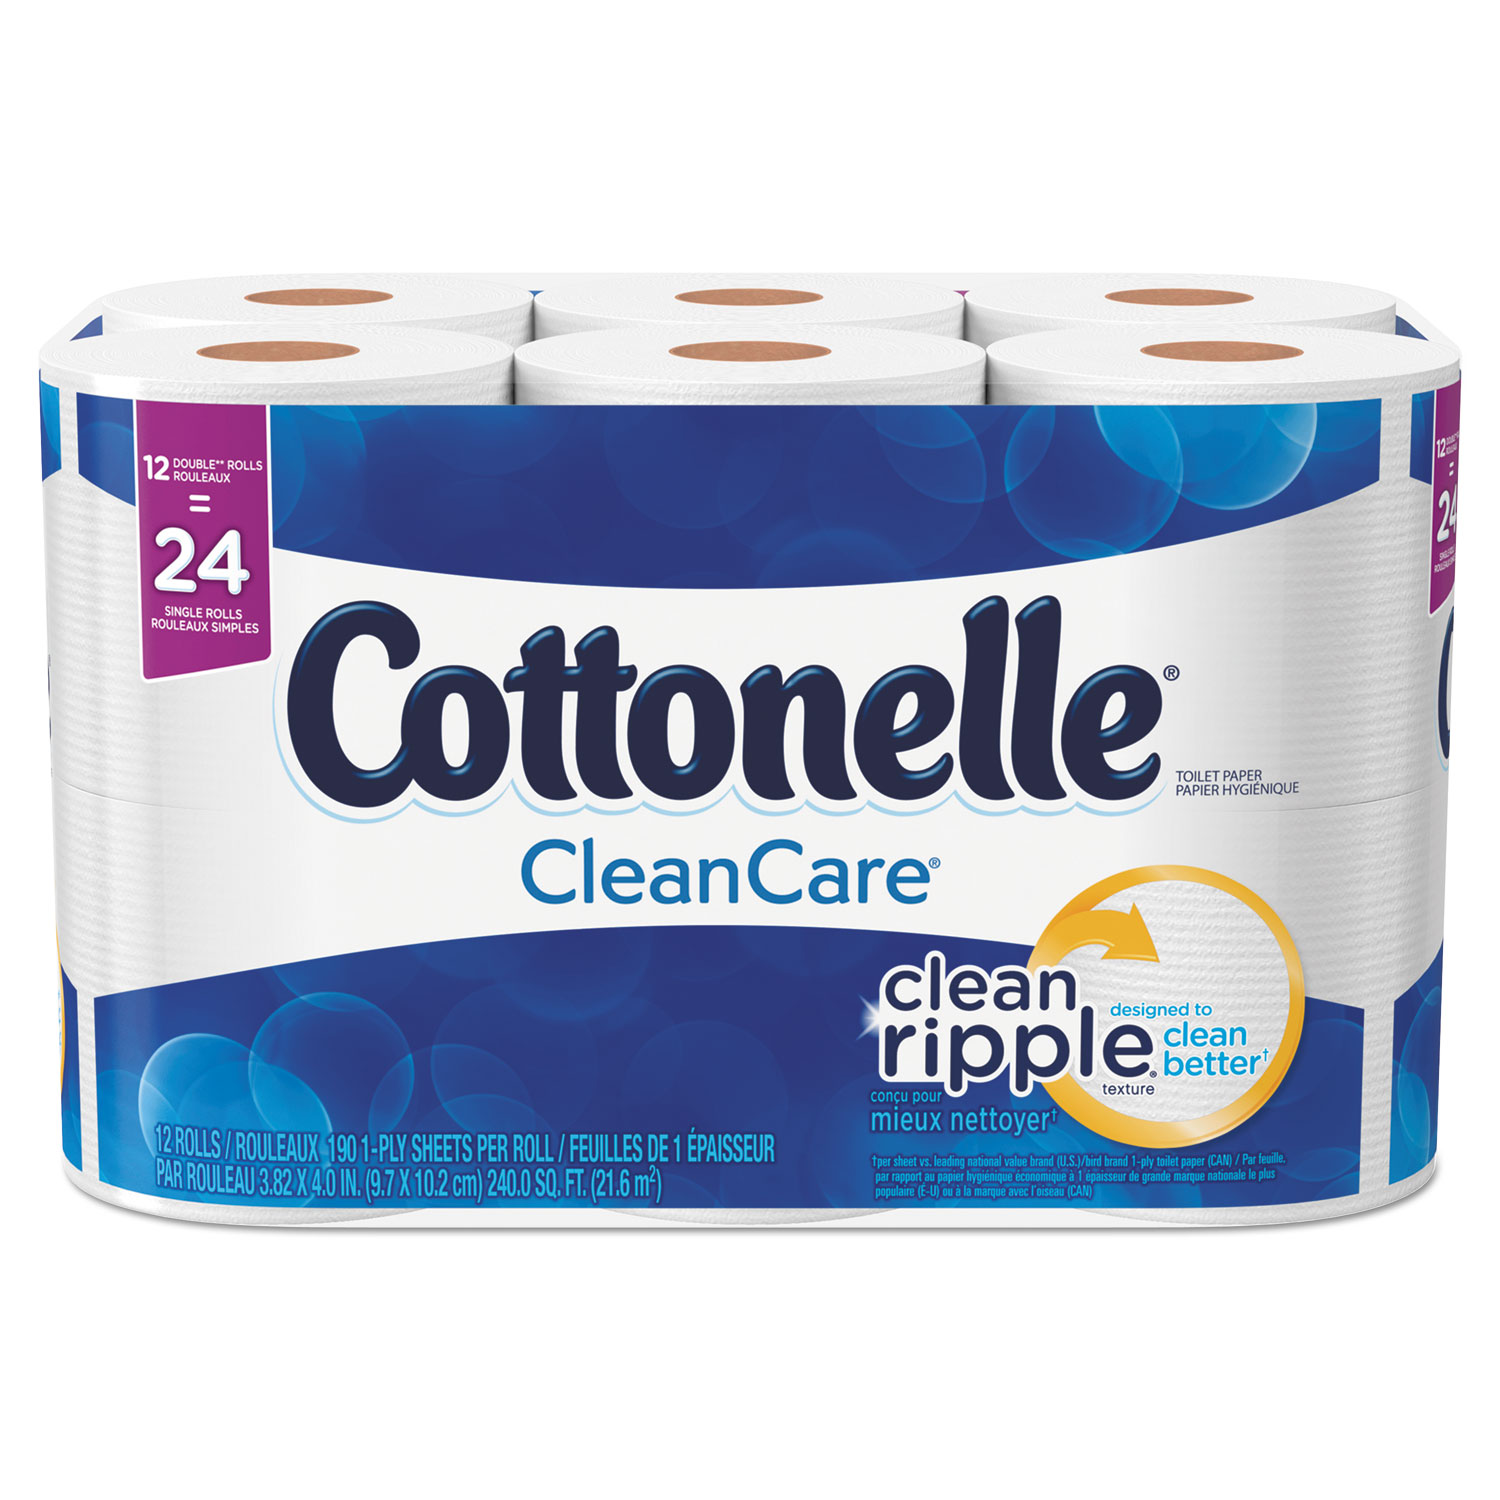  Cottonelle 12456 PACK Clean Care Bathroom Tissue, Septic Safe, 1-Ply, White, 170 Sheets/Roll, 12 Rolls/Pack (KCC12456PK) 